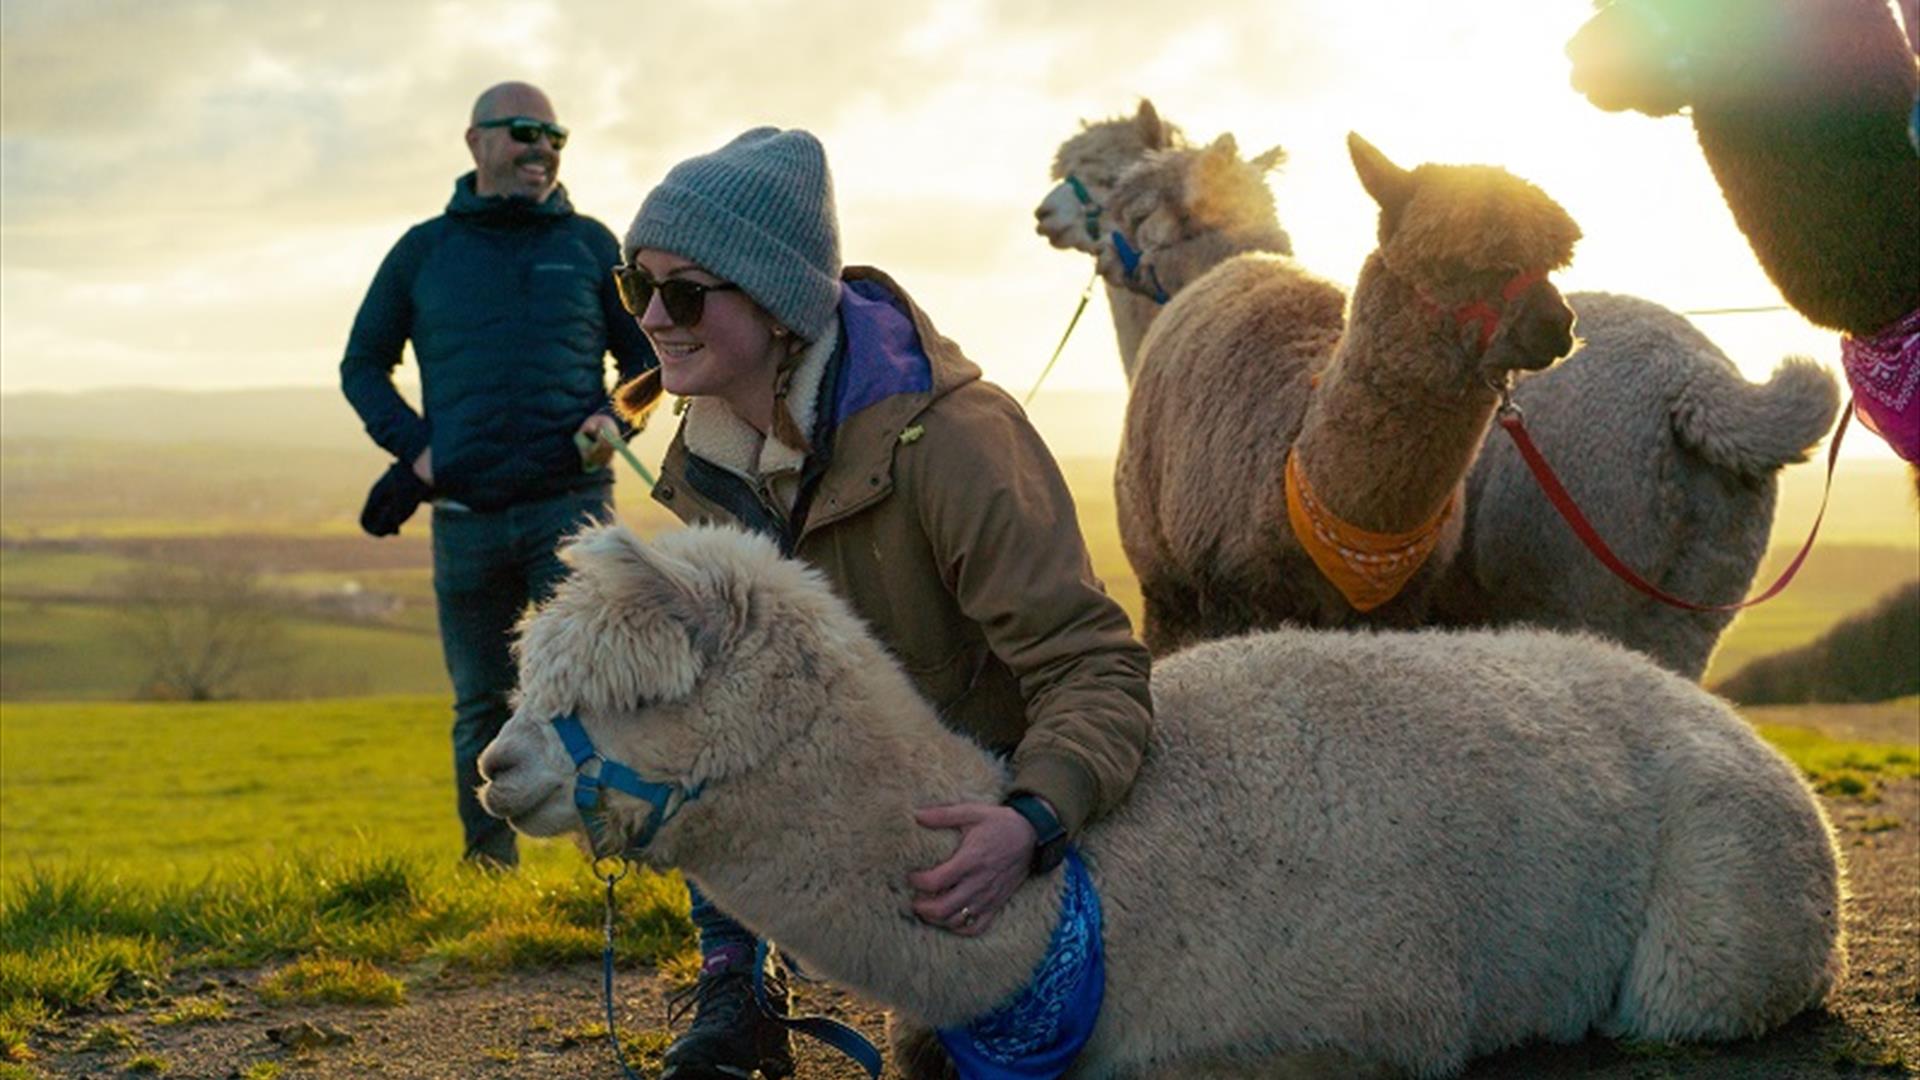 At sunset on a hillside with views to the horizon, a lady wearing a hat, sunglasses and a warm coat has her arm around the neck of an alpaca who is re